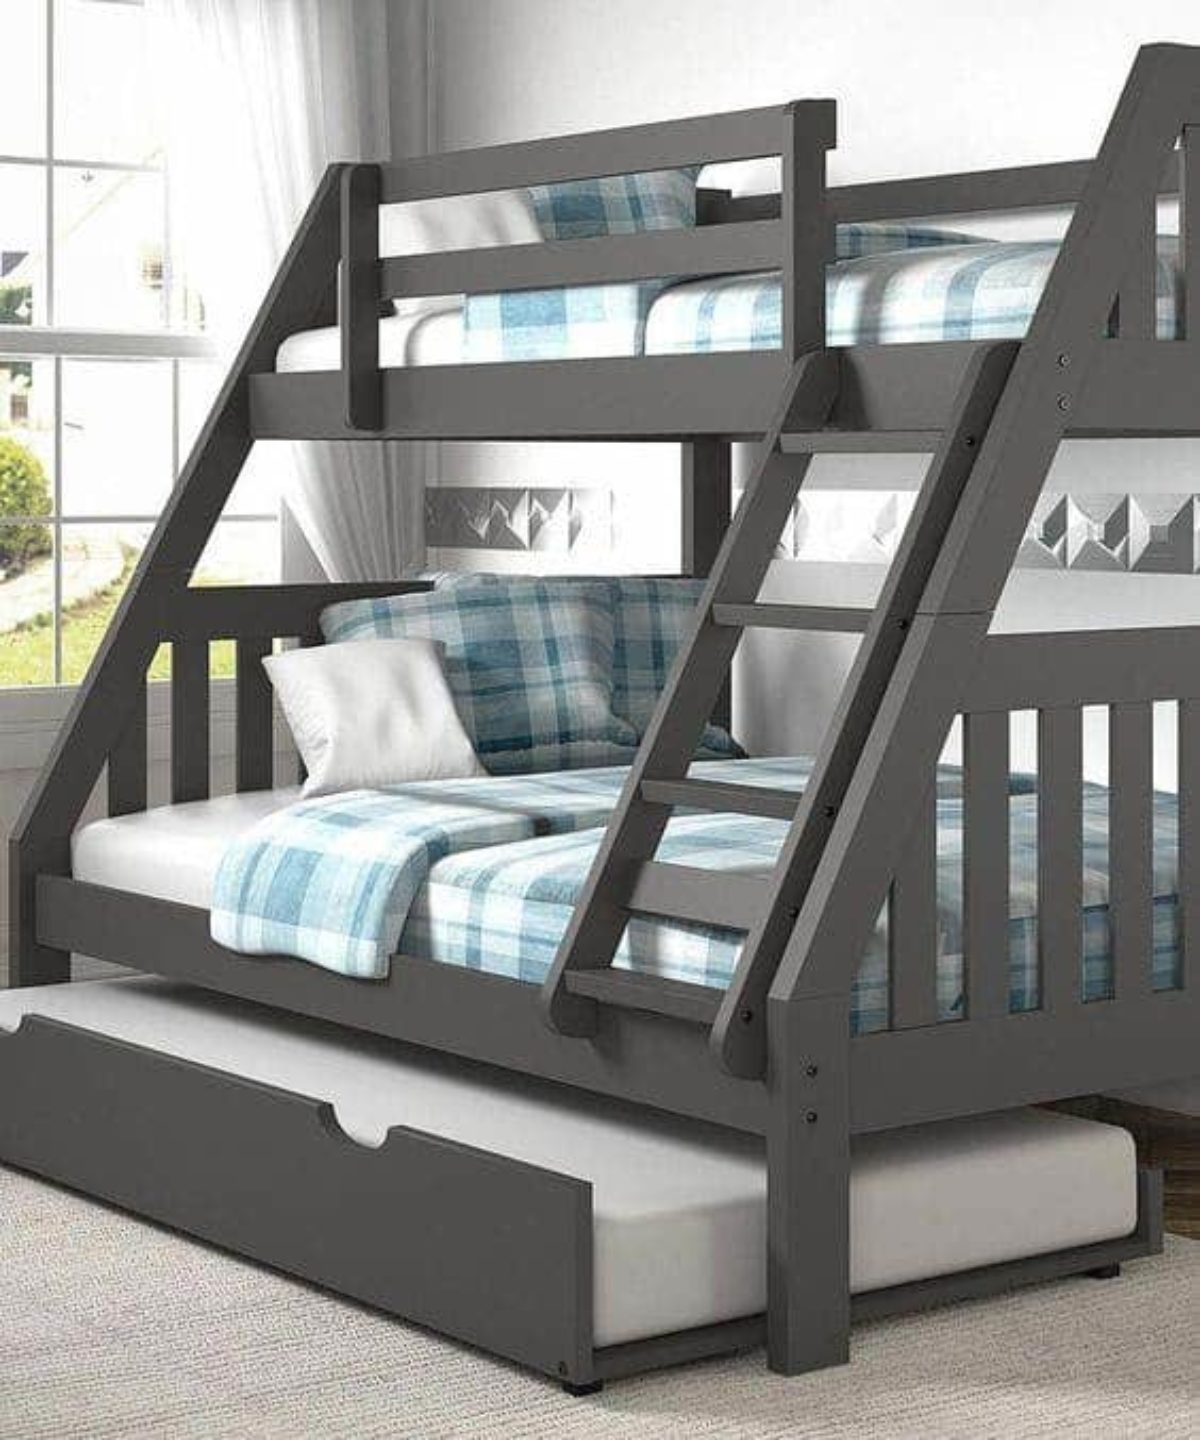 5 Steps To Make A Bunk Bed Ladder Safer, Wooden Bunk Bed Ladder Replacement